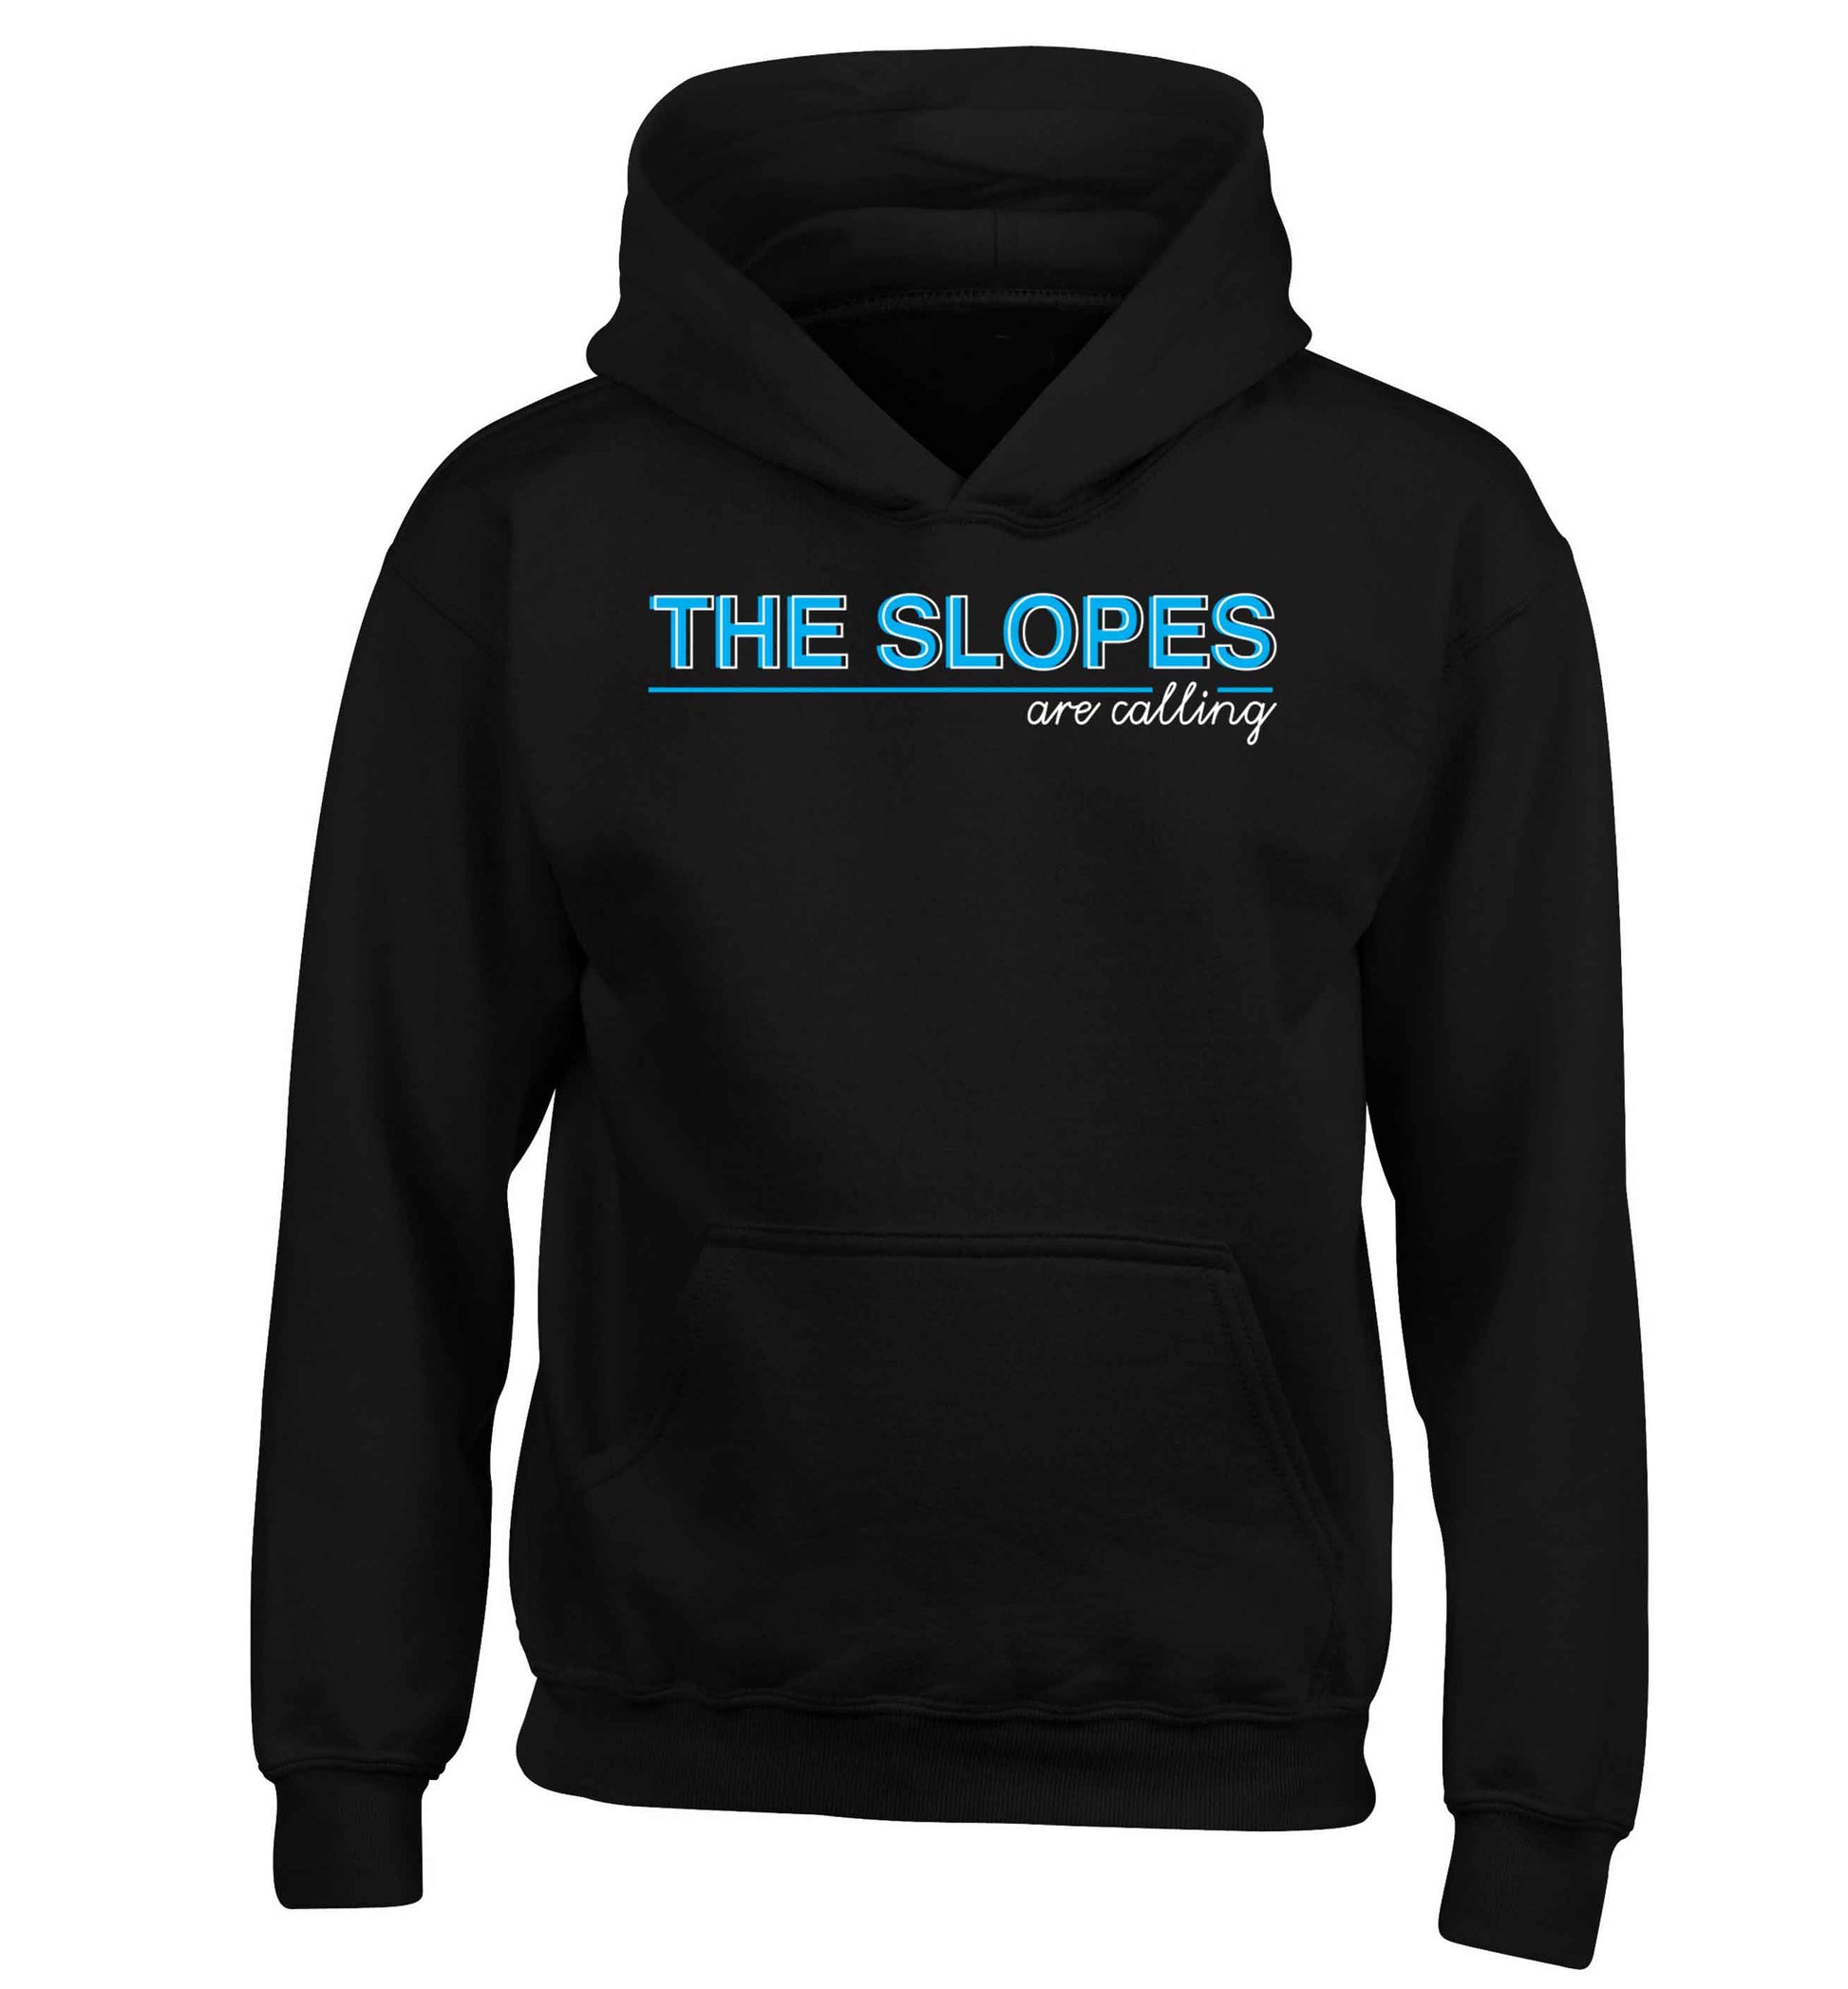 The slopes are calling children's black hoodie 12-13 Years